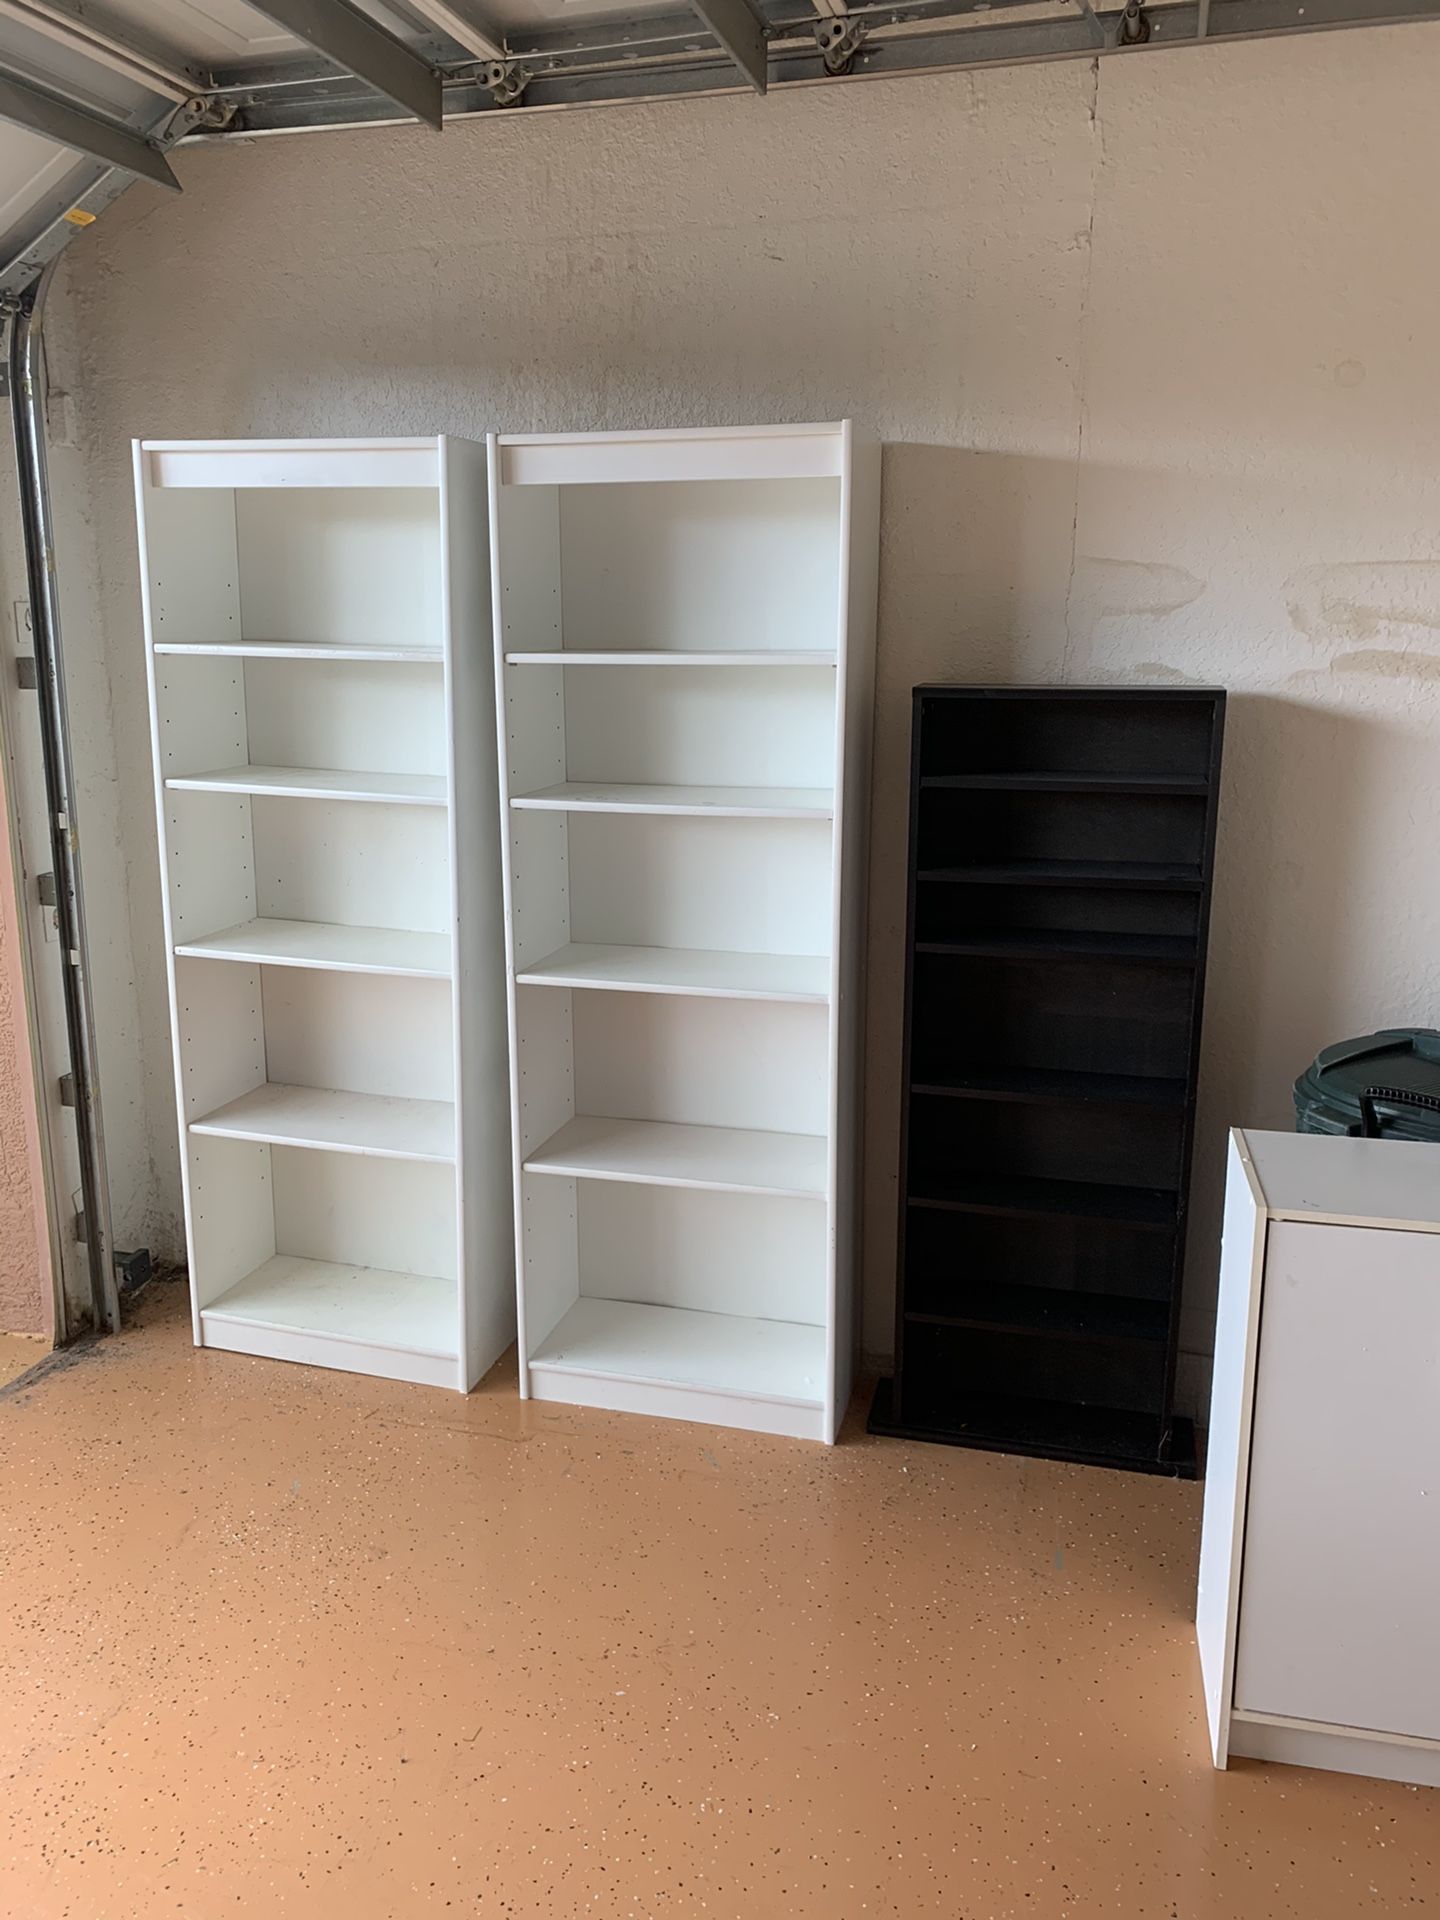 Storage shelves cabinets all of them